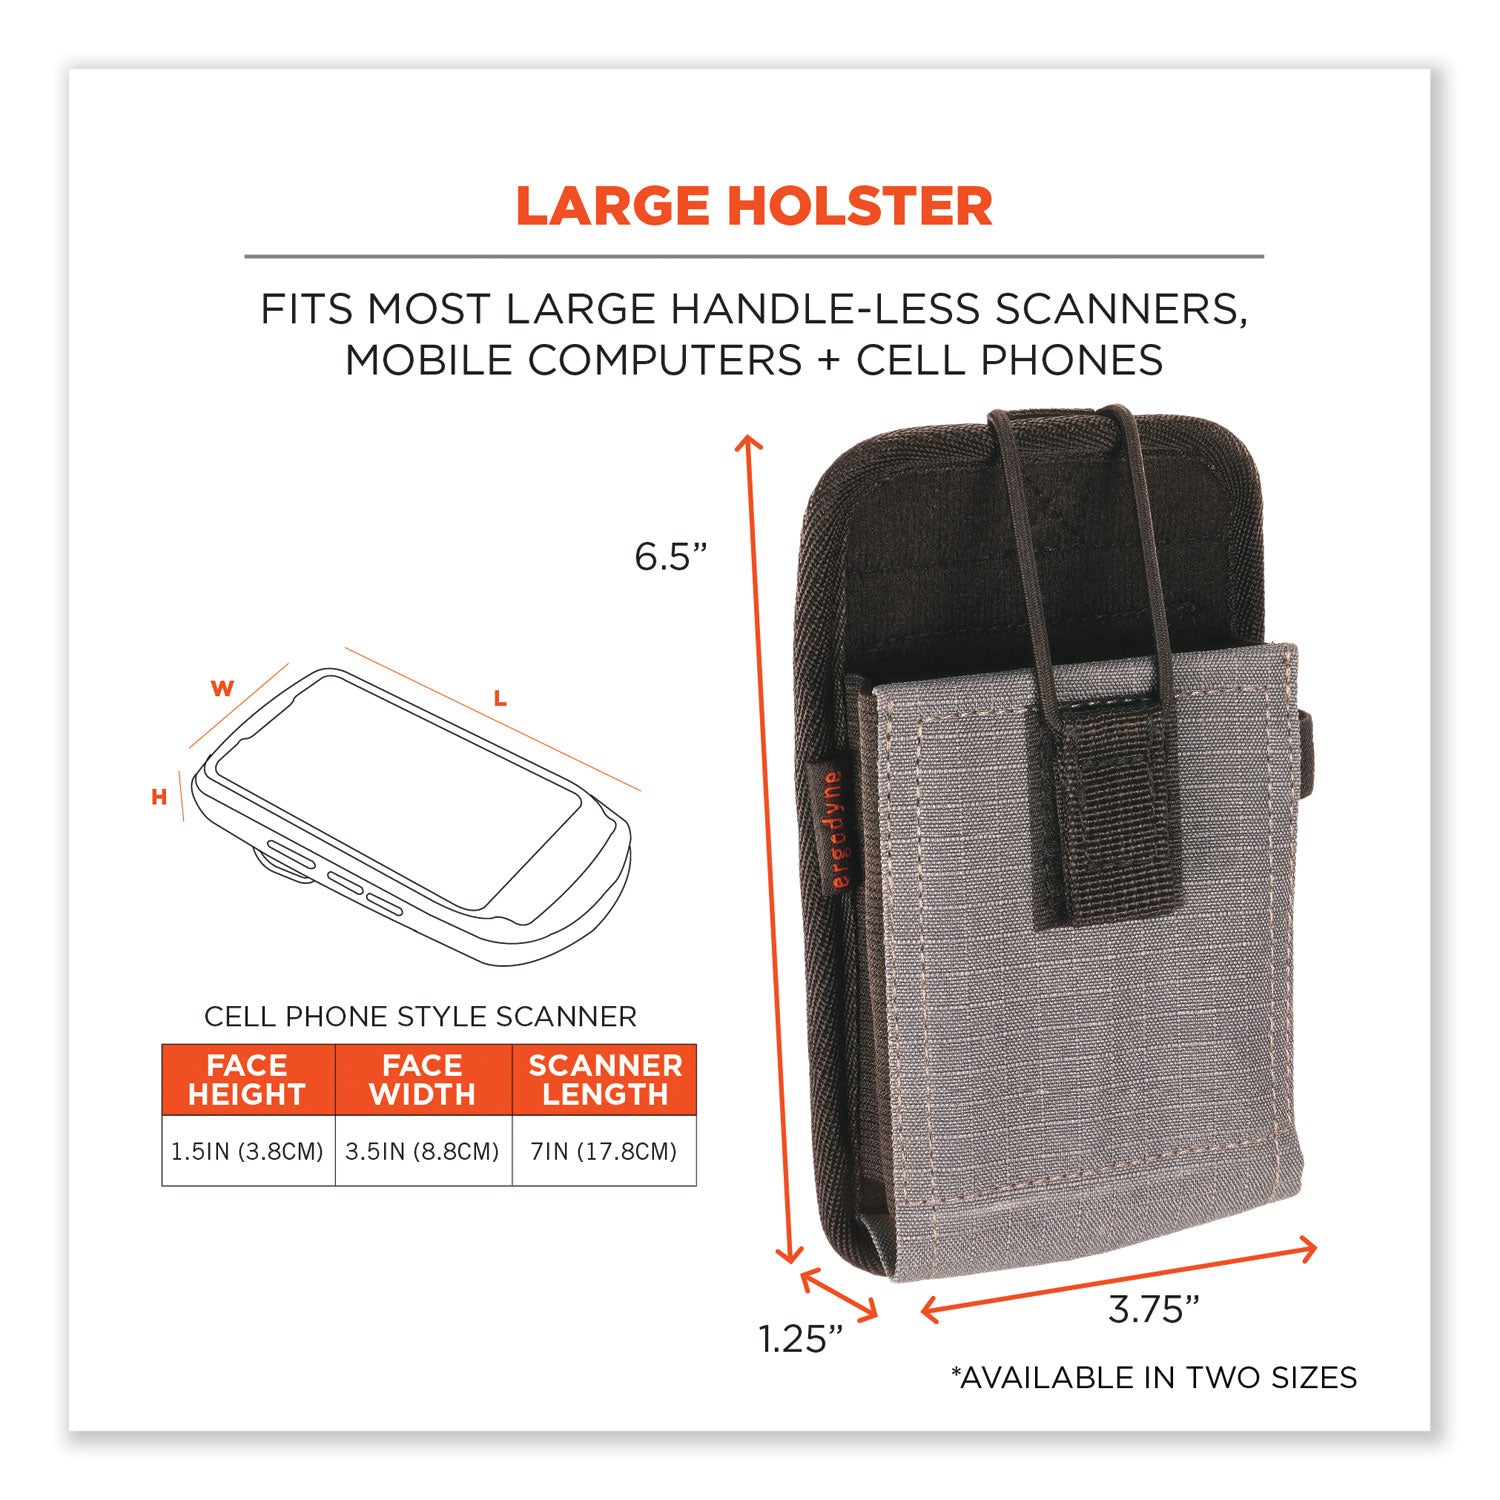 squids-5542-phone-style-scanner-holster-w-belt-loop-large-1-comp-375x125x-65-polyestergrayships-in-1-3-business-days_ego19192 - 3